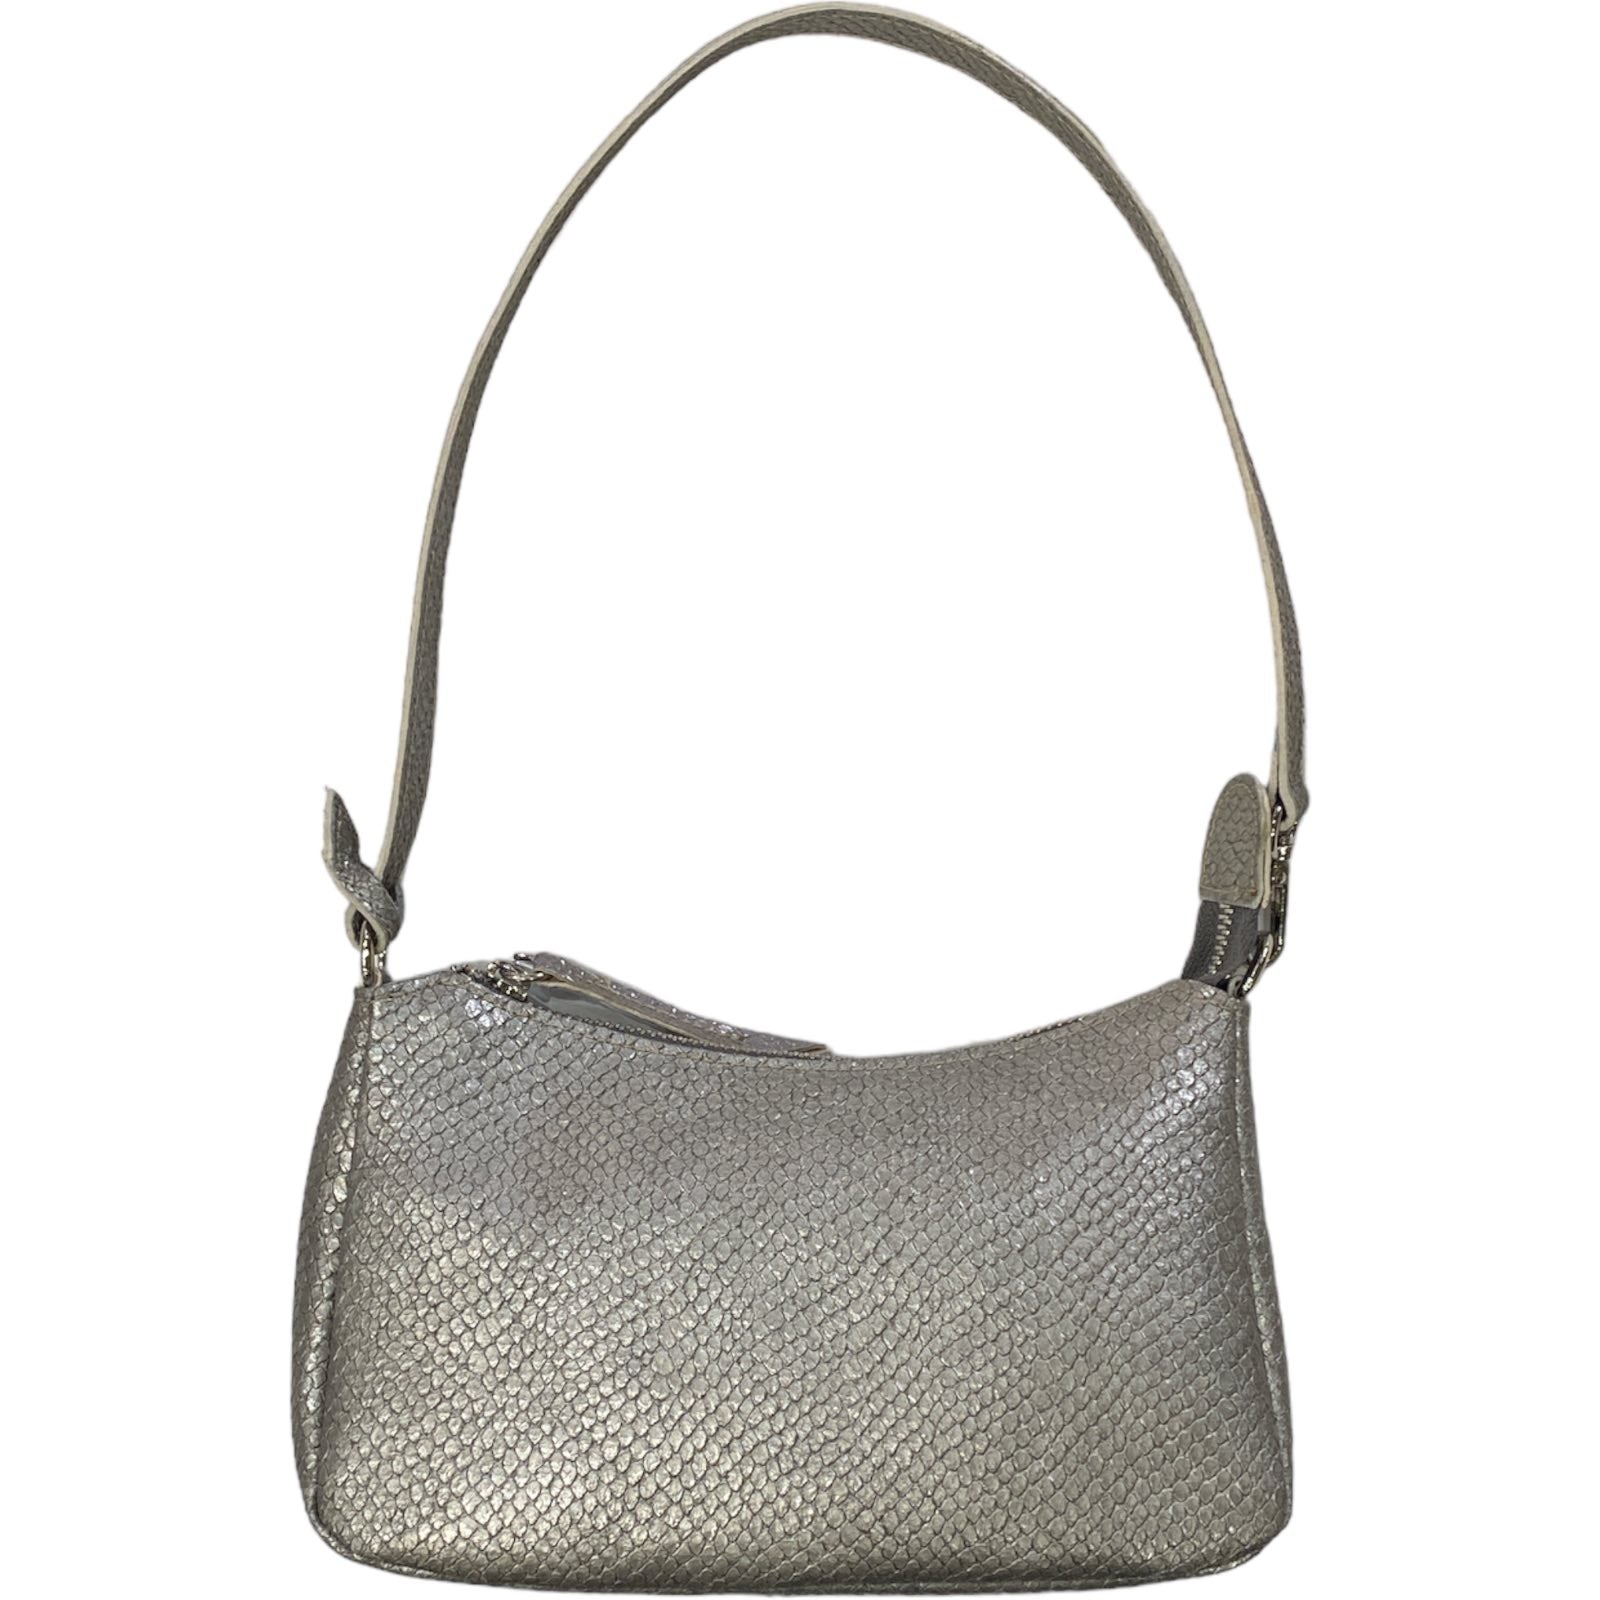 Natalie Small. Dark silver leather evening bag